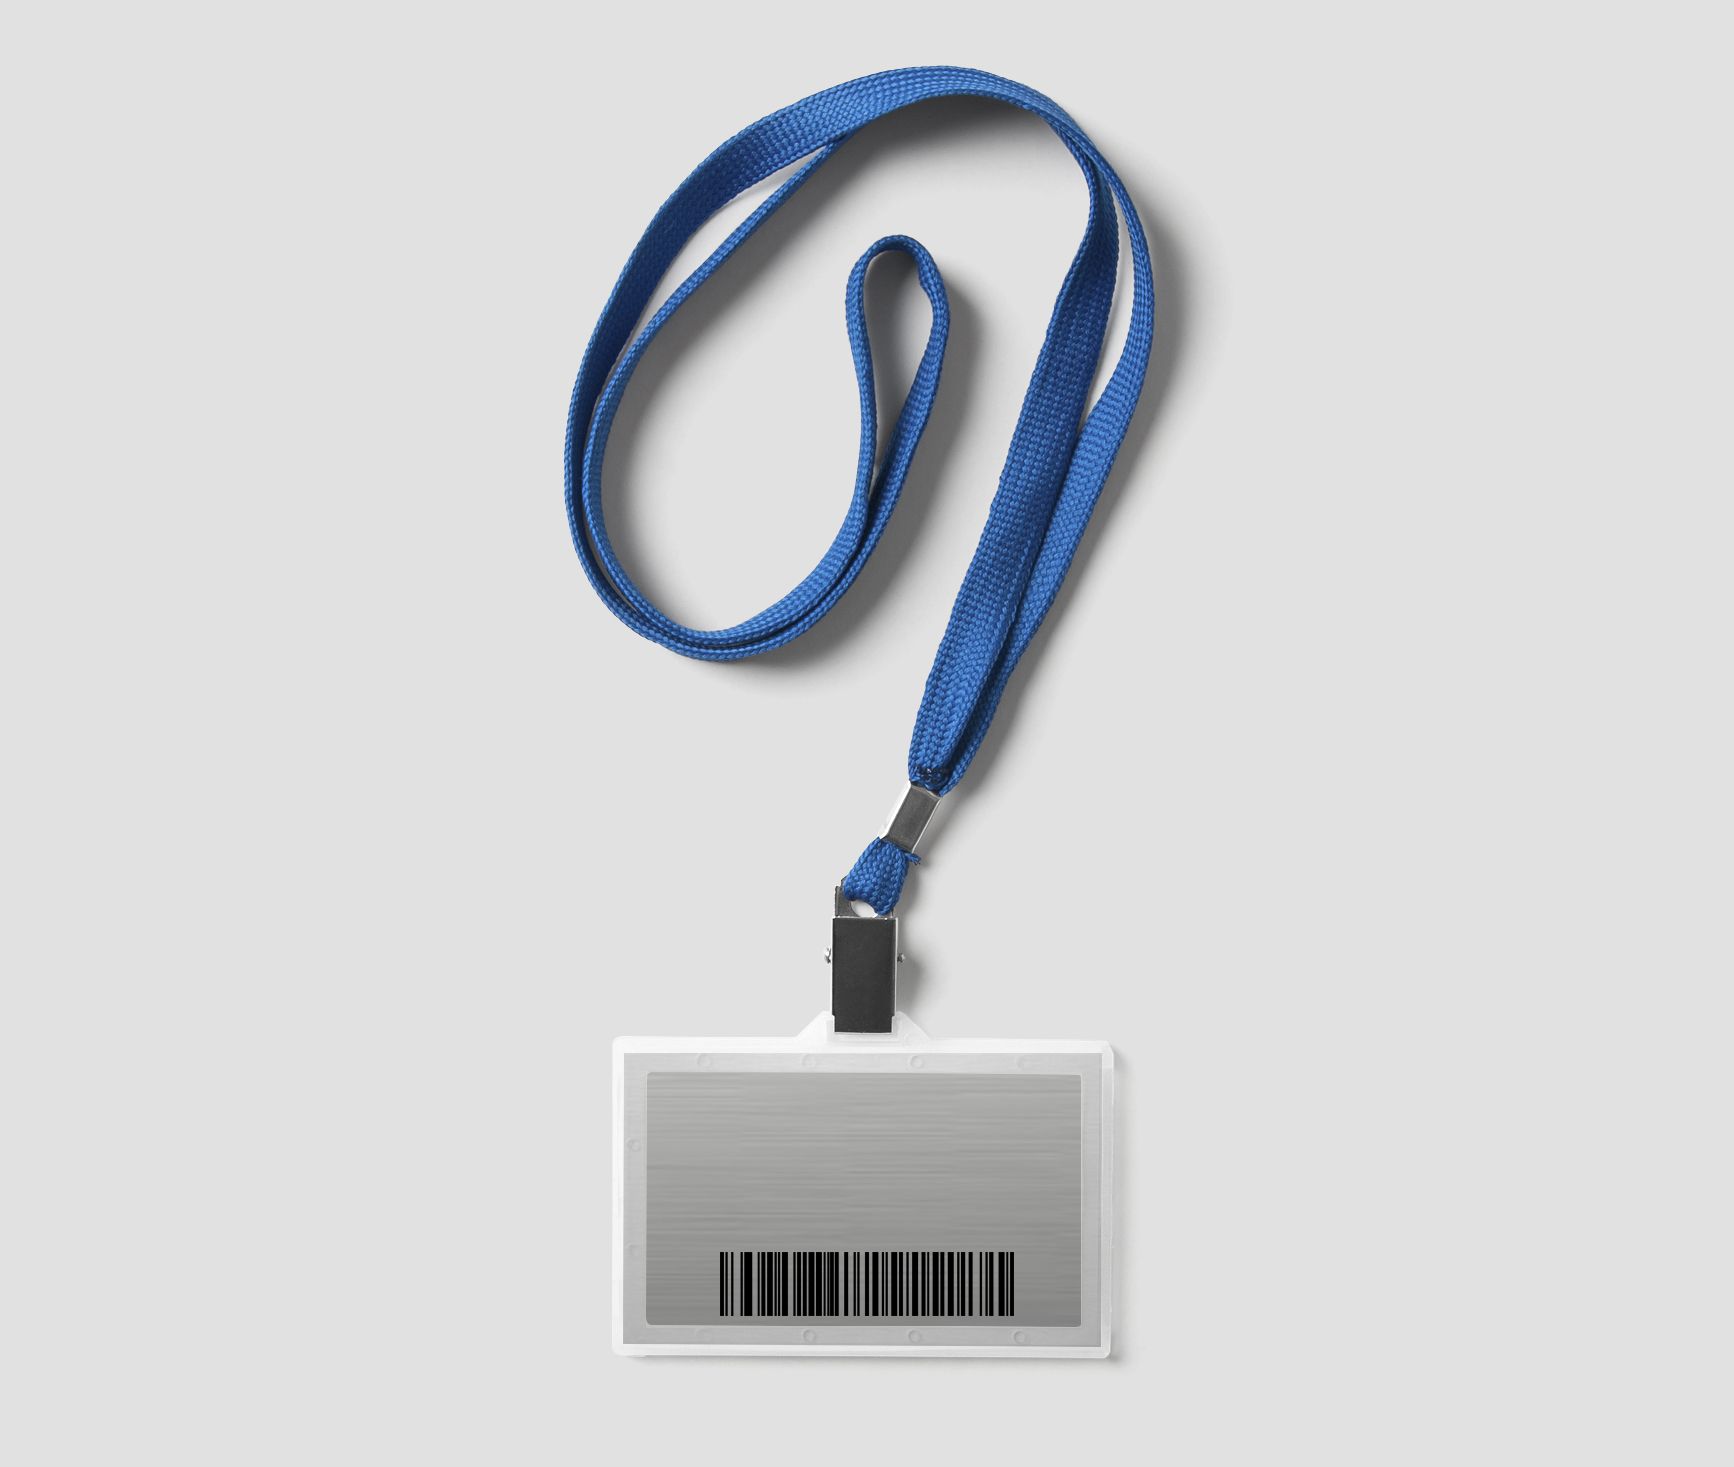 Picture for the barcode printing option of the 125 KHz CCT ISO card of STid Industry